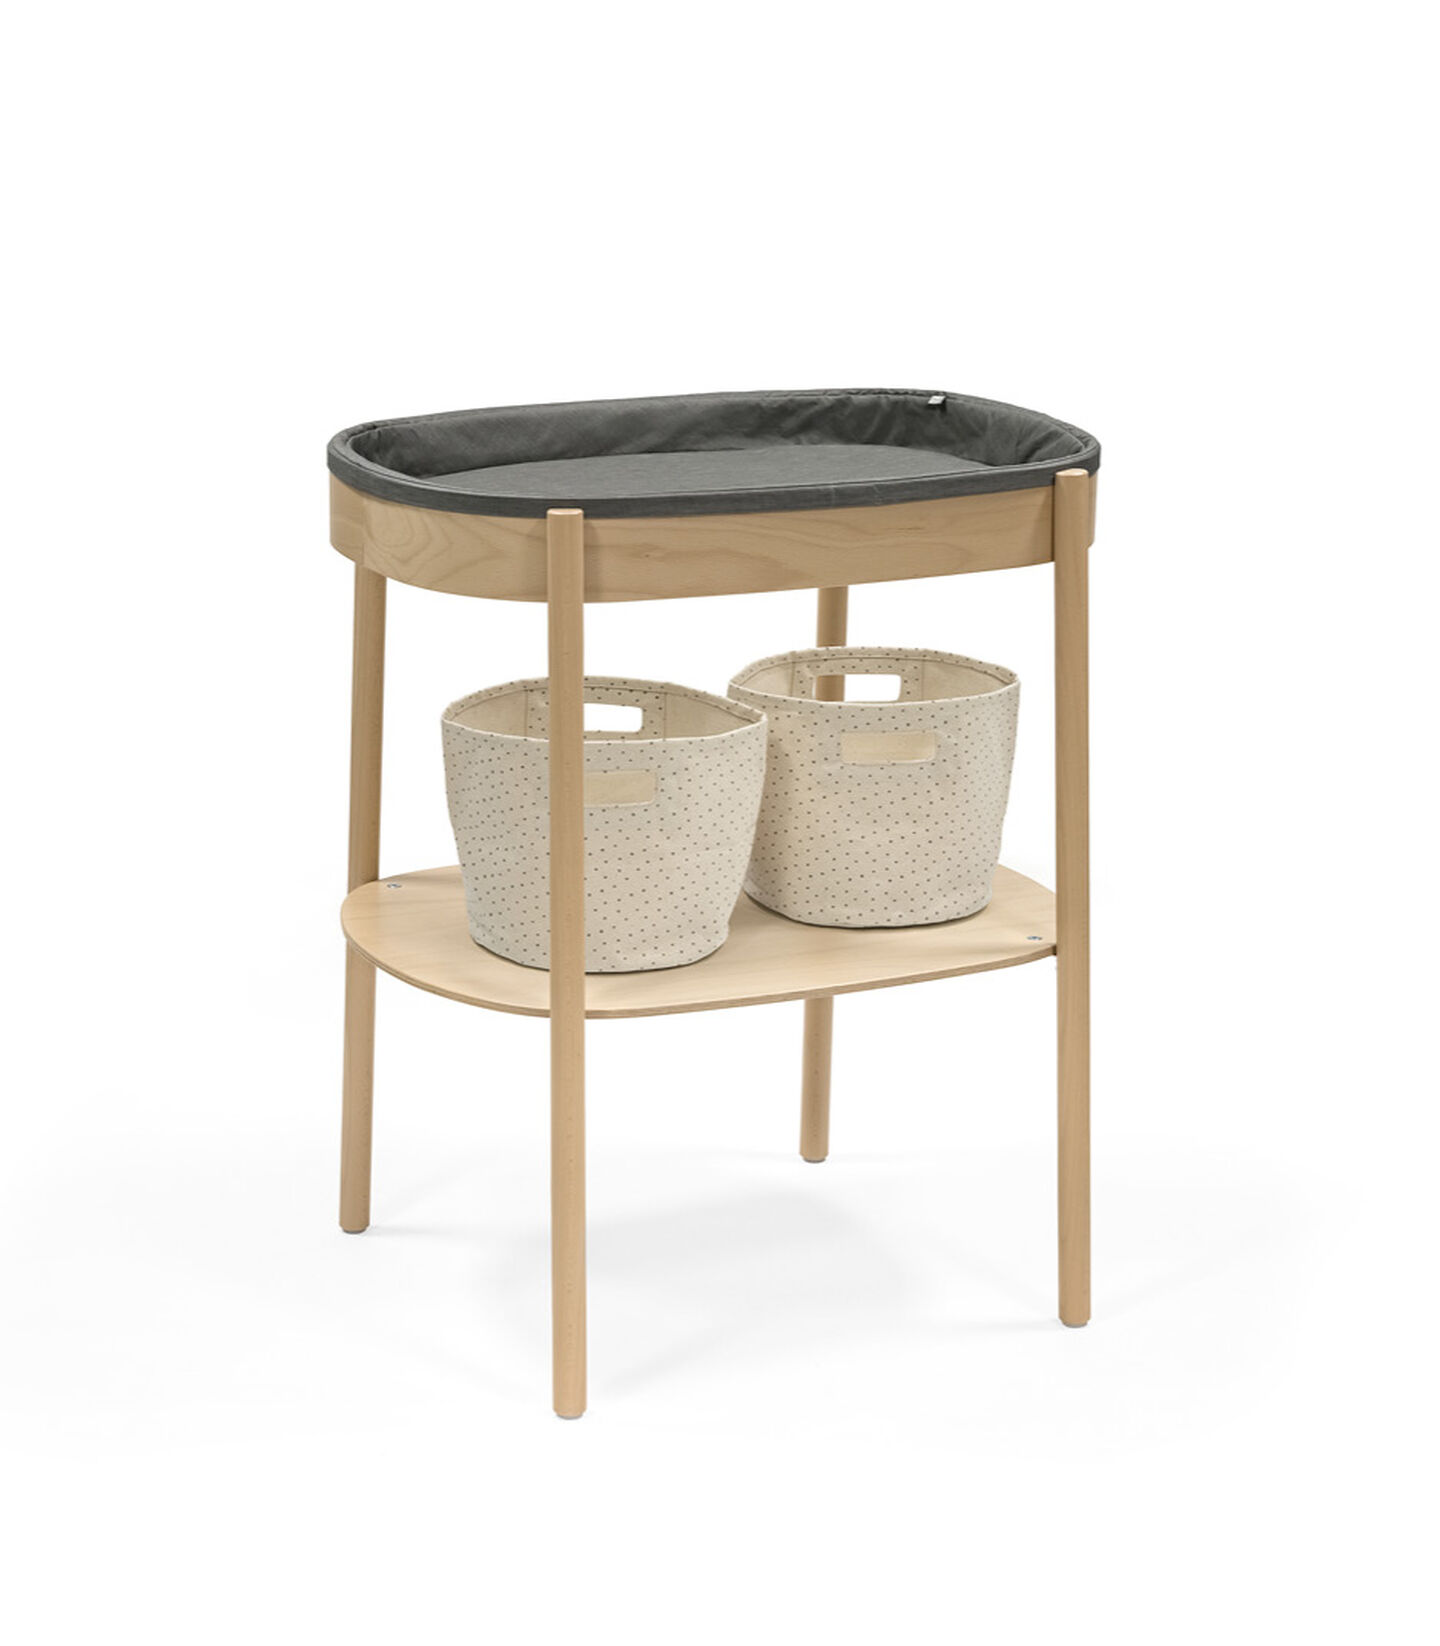 Stokke® Sleepi™ Changing Table, Natural, with Storage Baskets. Changing Pad Grey. view 4